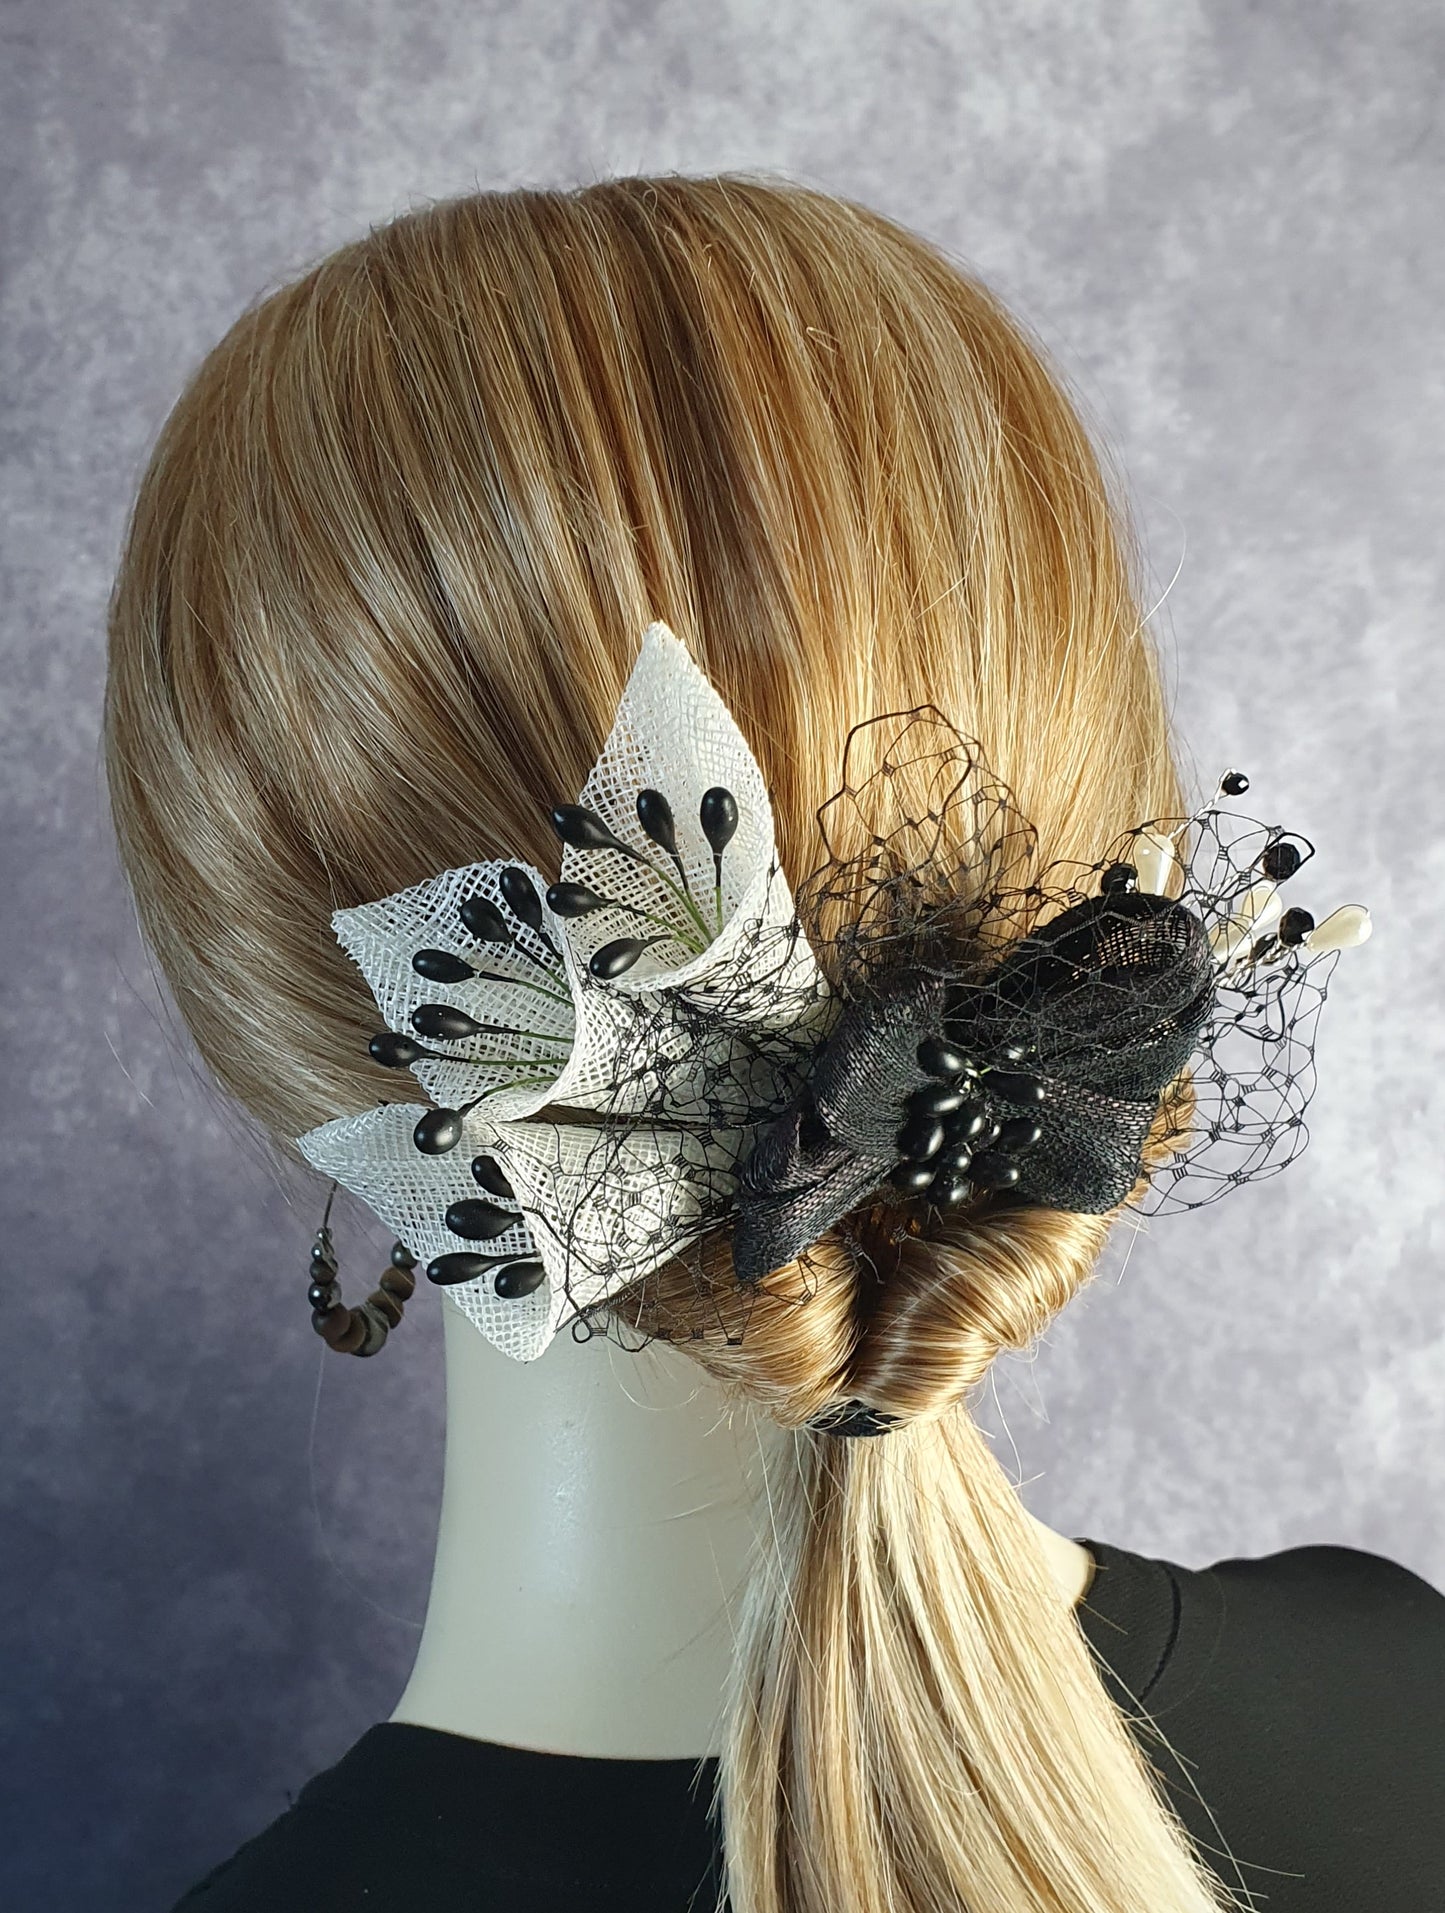 Handmade hair comb with flowers in white sinamay and black pistils - elegant hair accessory for weddings, guests and parties